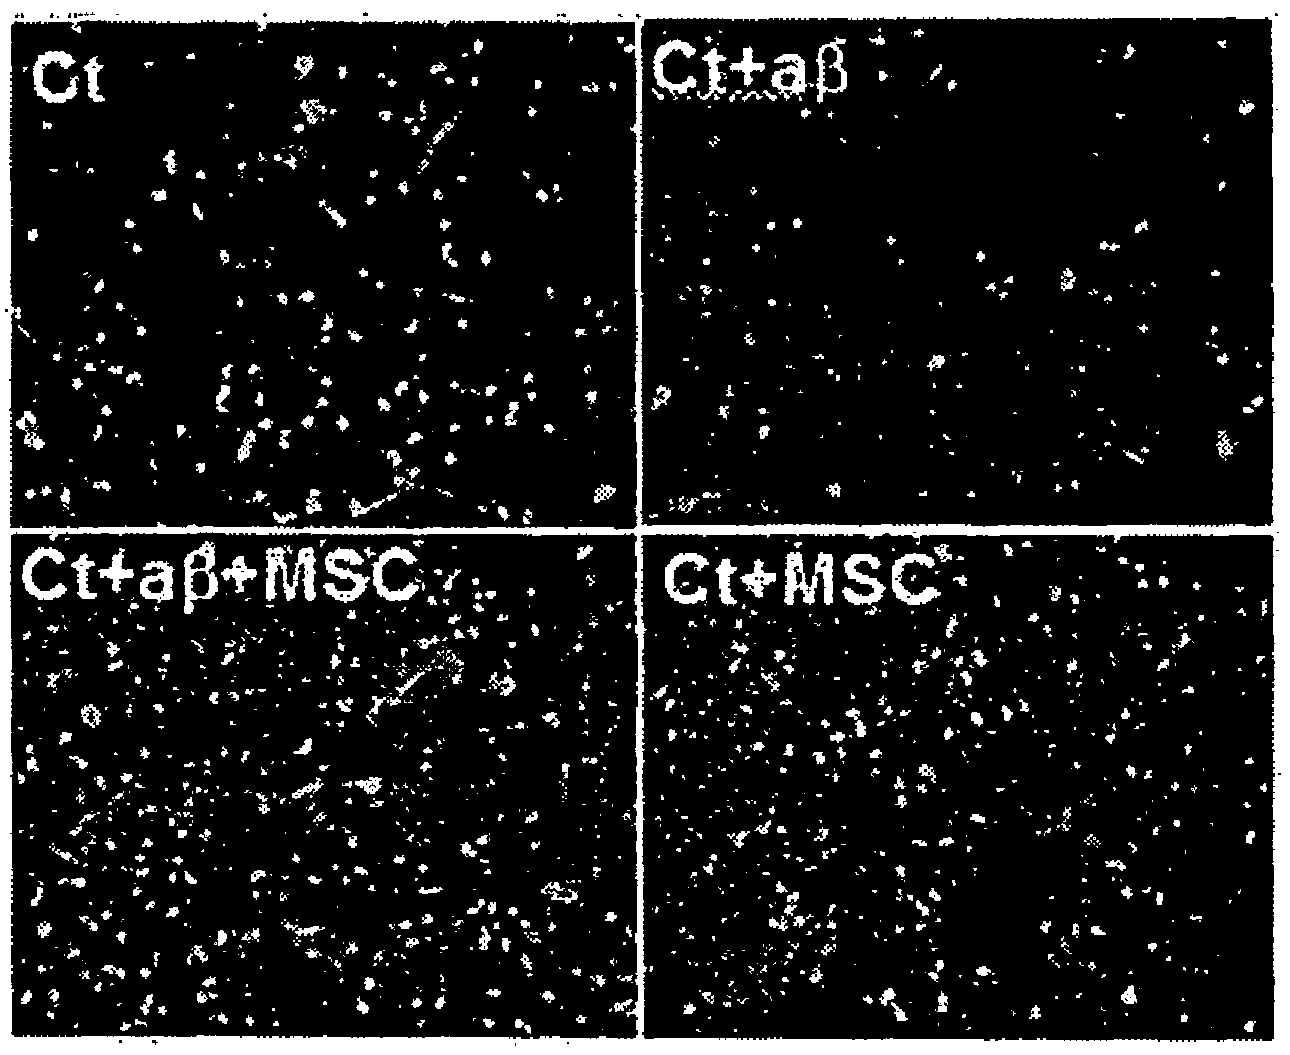 Composition comprising mesenchymal stem cells or mesenchymal stem cell culture fluid for preventing or treating neurological diseases